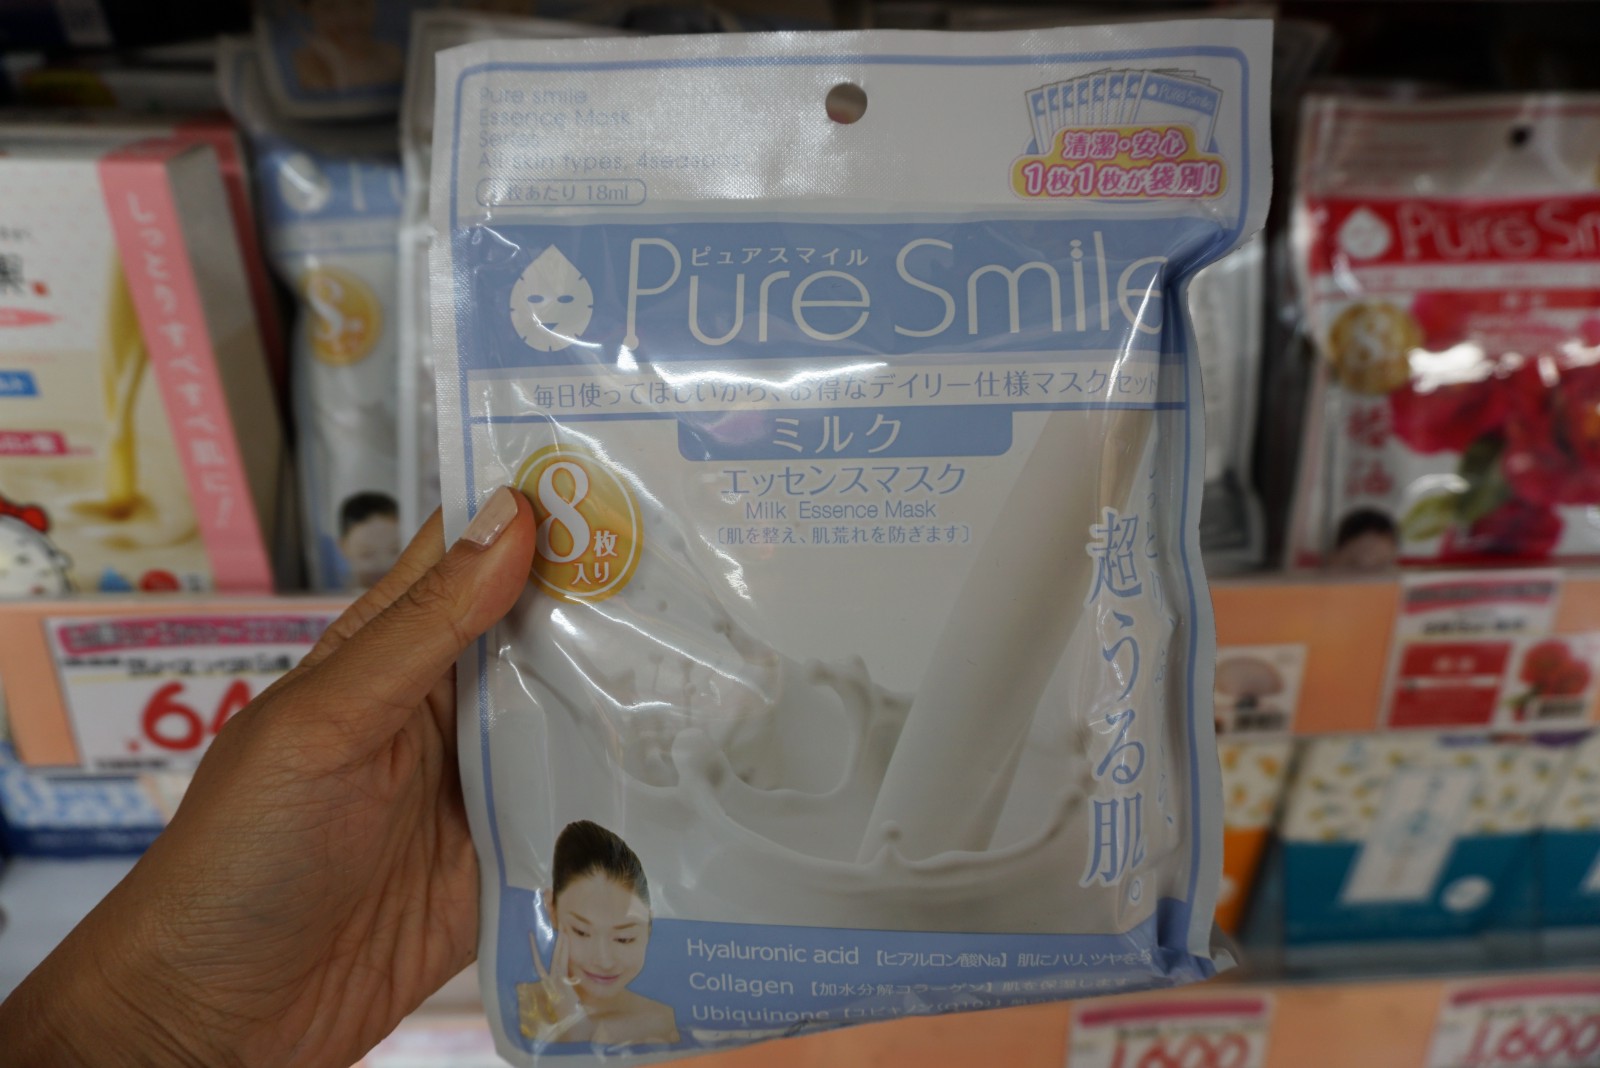 Pure Smile: Best Selling Drugstore Face Masks in Japan